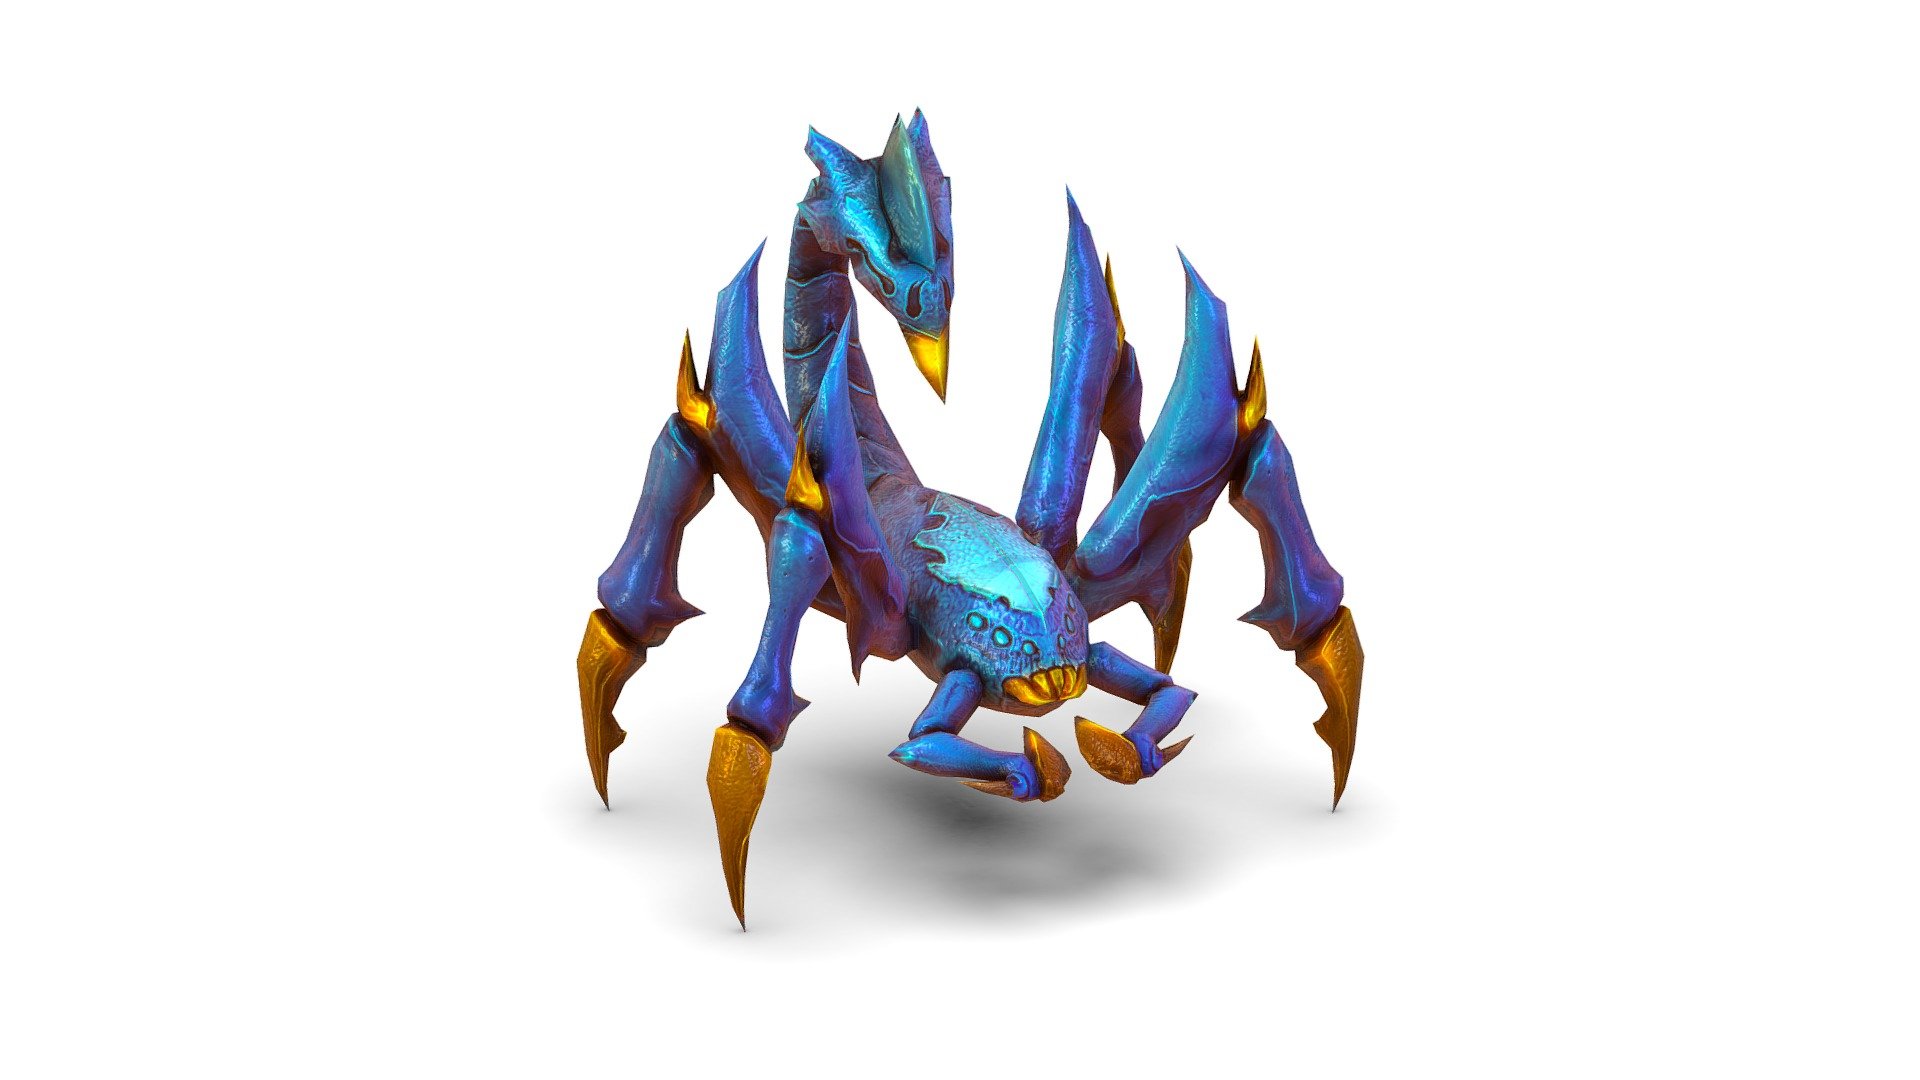 Low Poly Monster Blue Scorpio Creature  - 512x512 color texture only, 3dsMax file included - Low Poly Monster Blue Scorpio Creature - Buy Royalty Free 3D model by Oleg Shuldiakov (@olegshuldiakov) 3d model